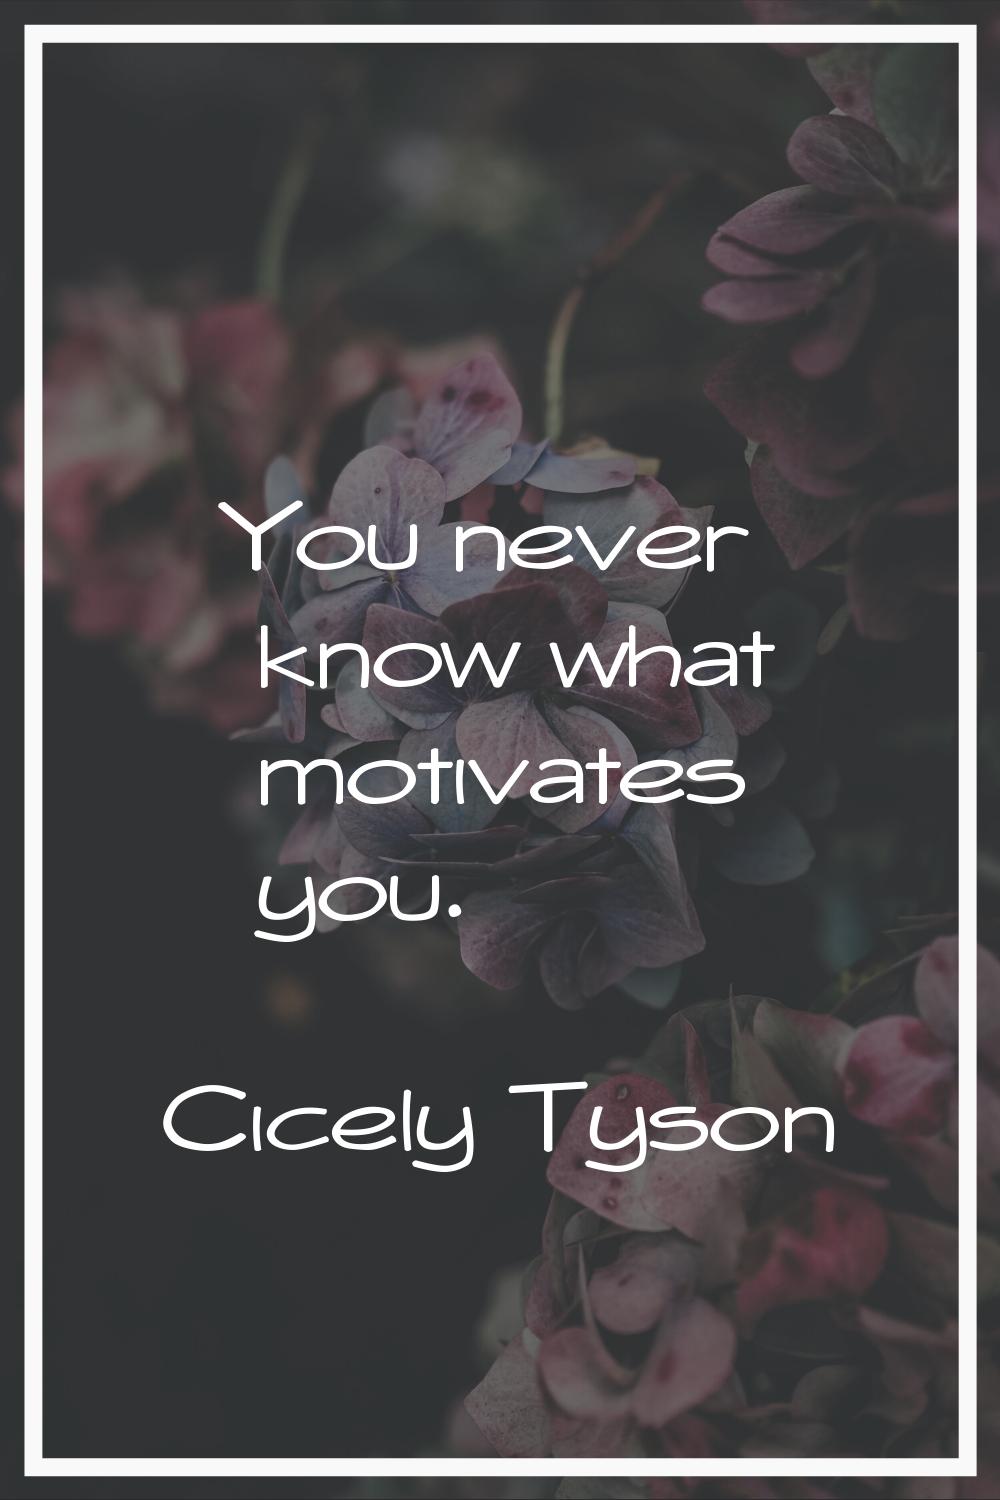 You never know what motivates you.